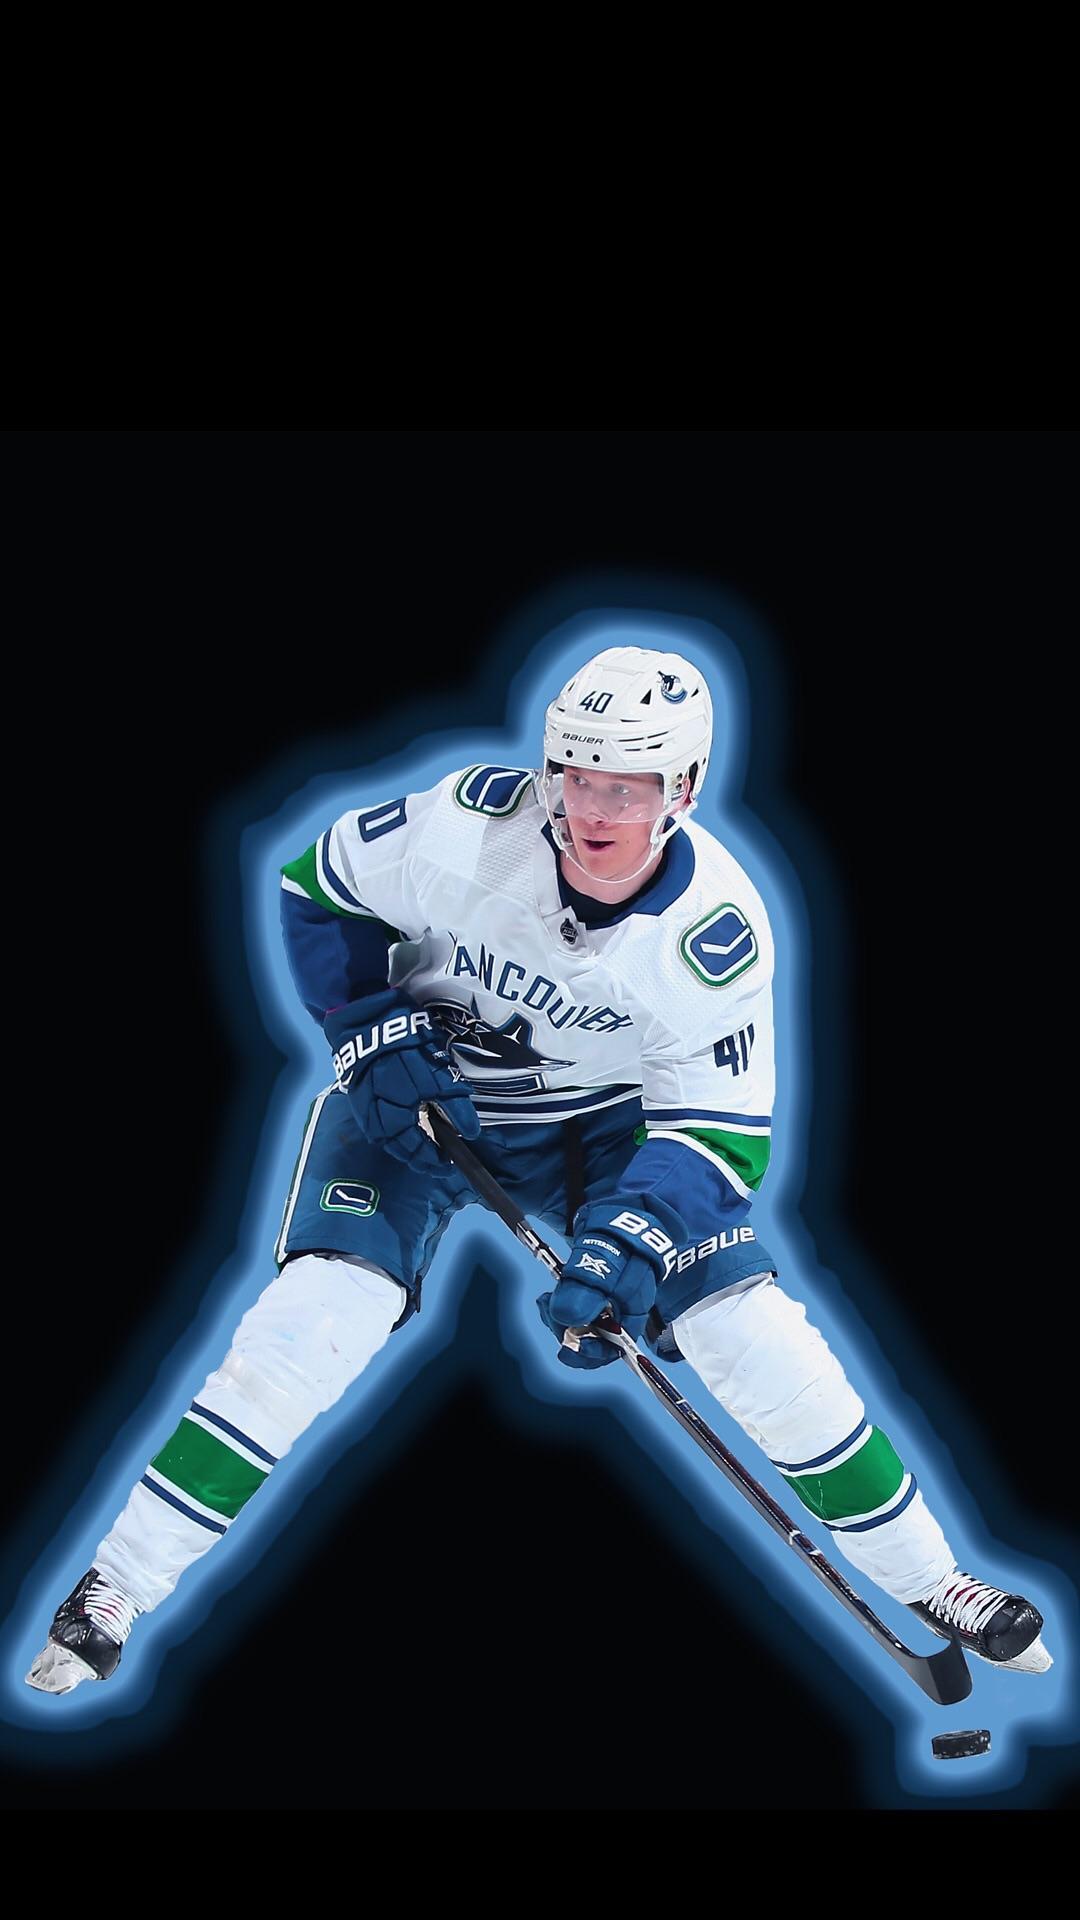 Simple Elias Pettersson iPhone wallpaper I made